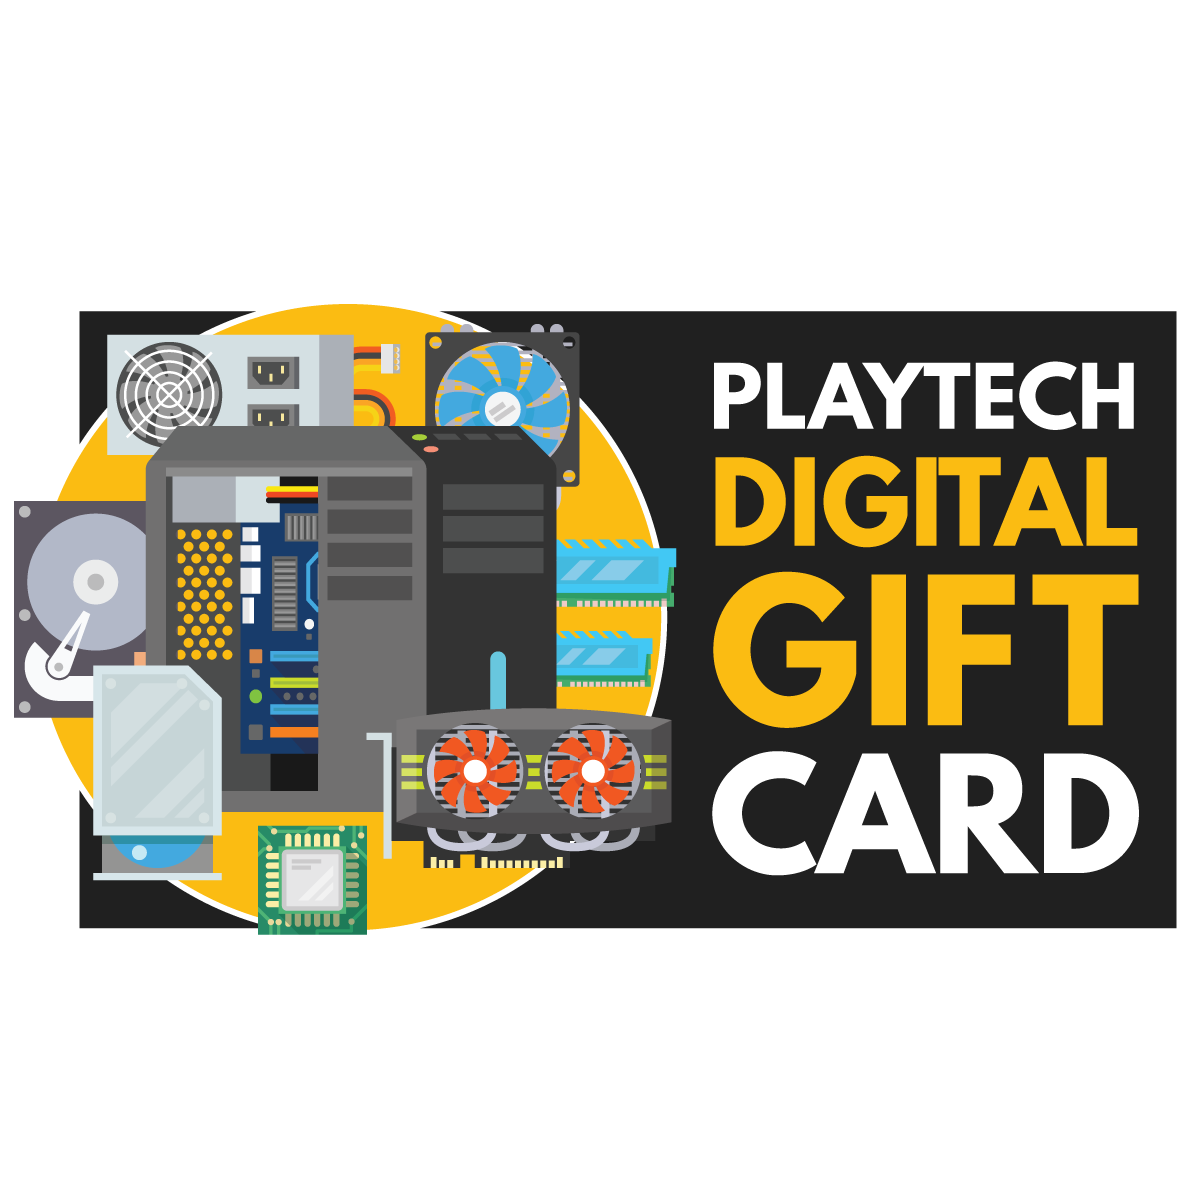 Playtech Gift Cards $50 - Digital Delivery Only - Playtech